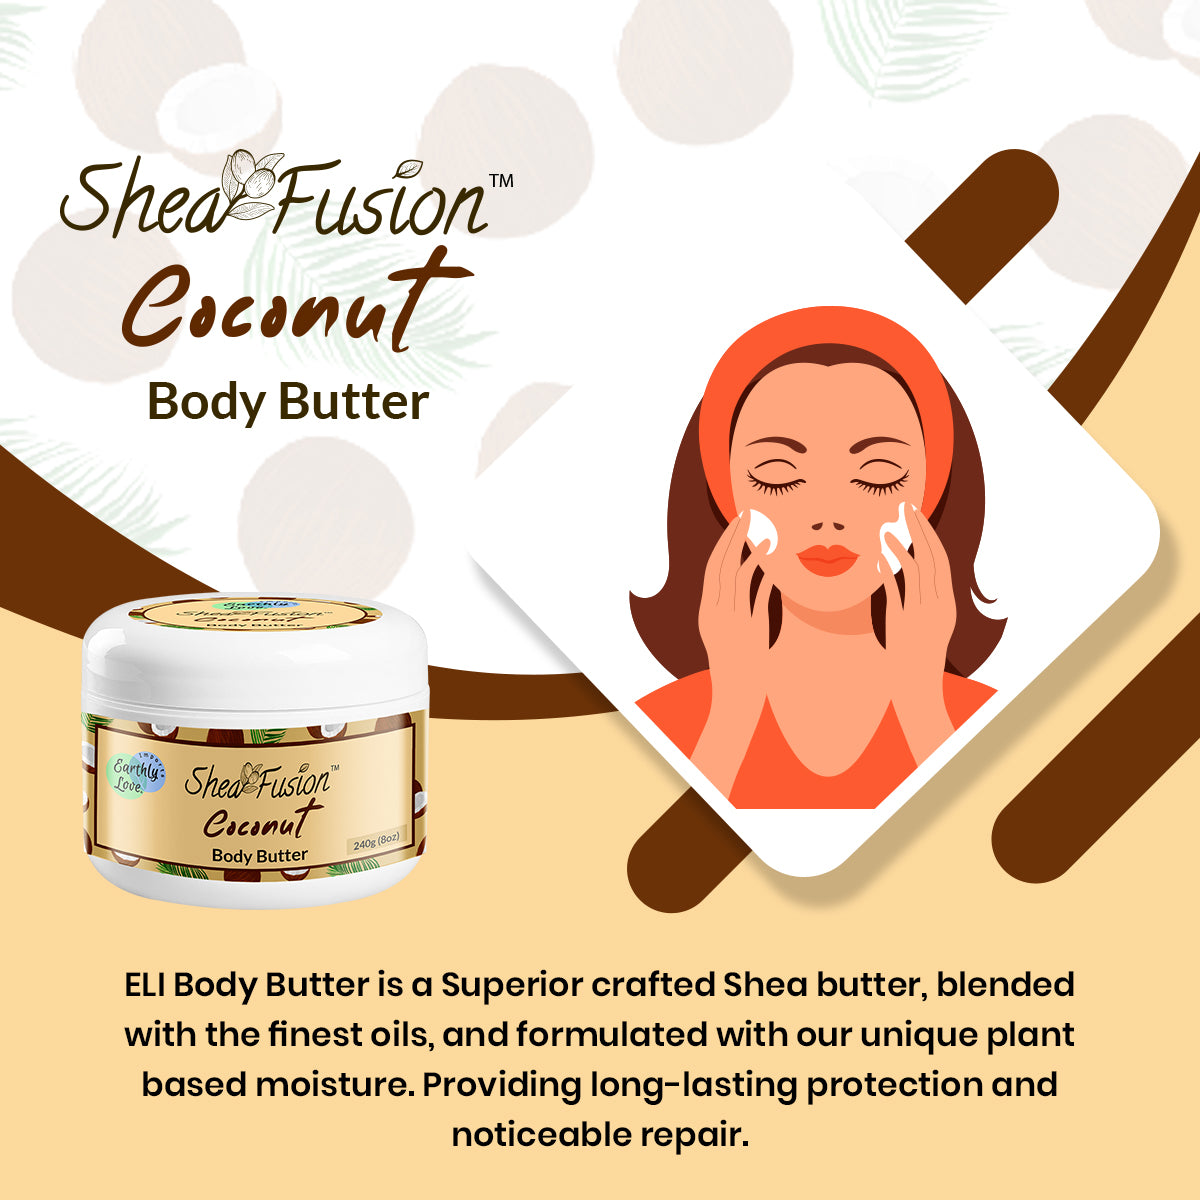 SheaFusion "Coconut" Body Butter